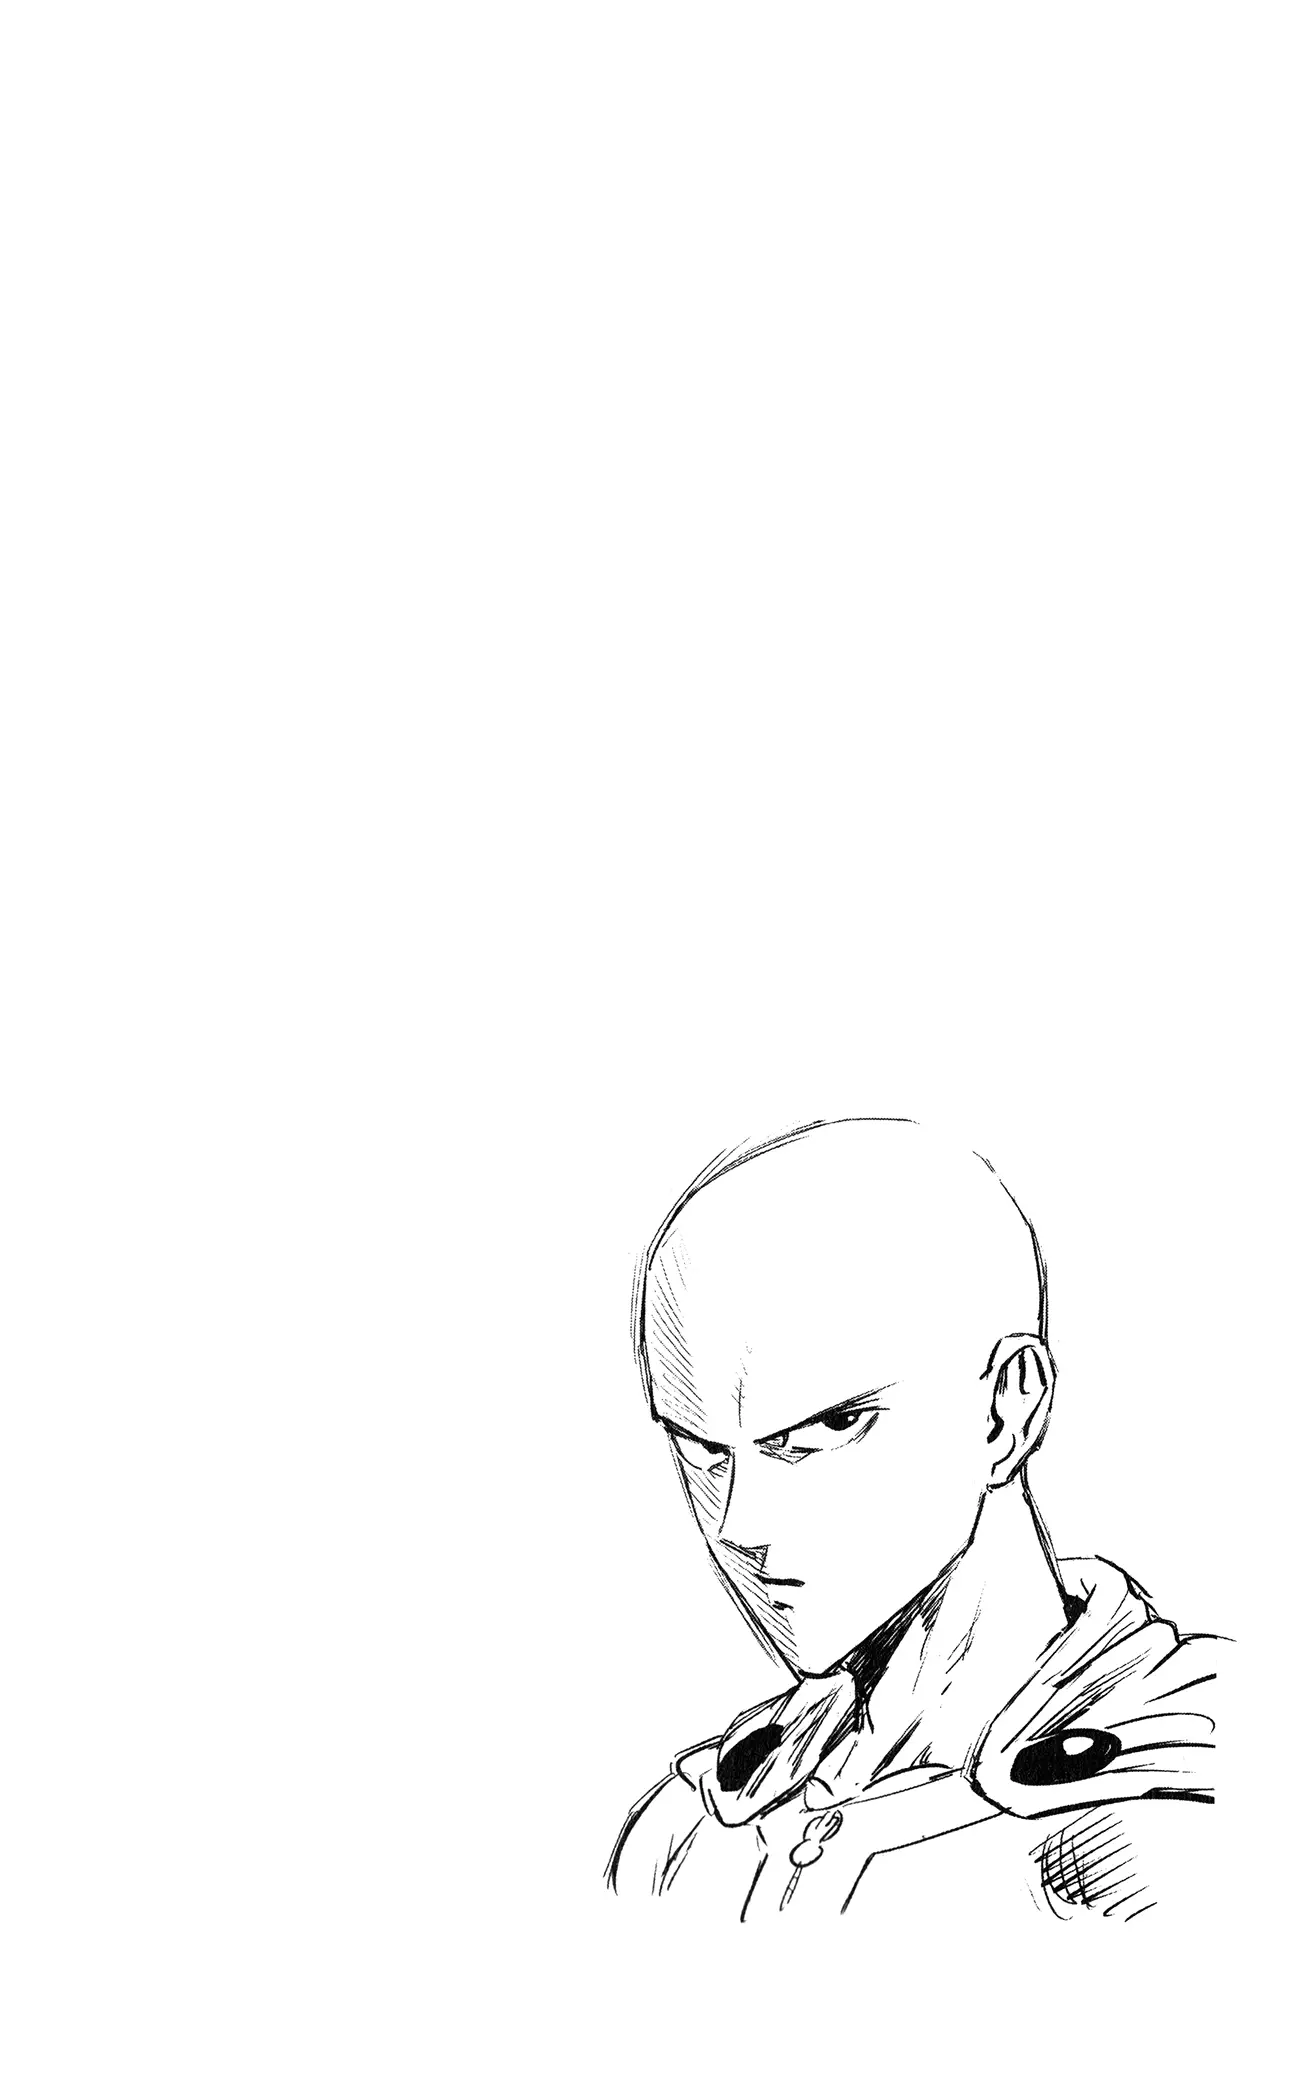 One Punch Man Chapter 163.5, READ One Punch Man Chapter 163.5 ONLINE, lost in the cloud genre,lost in the cloud gif,lost in the cloud girl,lost in the cloud goods,lost in the cloud goodreads,lost in the cloud,lost ark cloud gaming,lost odyssey cloud gaming,lost in the cloud fanart,lost in the cloud fanfic,lost in the cloud fandom,lost in the cloud first kiss,lost in the cloud font,lost in the cloud ending,lost in the cloud episode 97,lost in the cloud edit,lost in the cloud explained,lost in the cloud dog,lost in the cloud discord server,lost in the cloud desktop wallpaper,lost in the cloud drawing,can't find my cloud on network,lost in the cloud characters,lost in the cloud chapter 93 release date,lost in the cloud birthday,lost in the cloud birthday art,lost in the cloud background,lost in the cloud banner,lost in the clouds meaning,what is the black cloud in lost,lost in the cloud ao3,lost in the cloud anime,lost in the cloud art,lost in the cloud author twitter,lost in the cloud author instagram,lost in the cloud artist,lost in the cloud acrylic stand,lost in the cloud artist twitter,lost in the cloud art style,lost in the cloud analysis